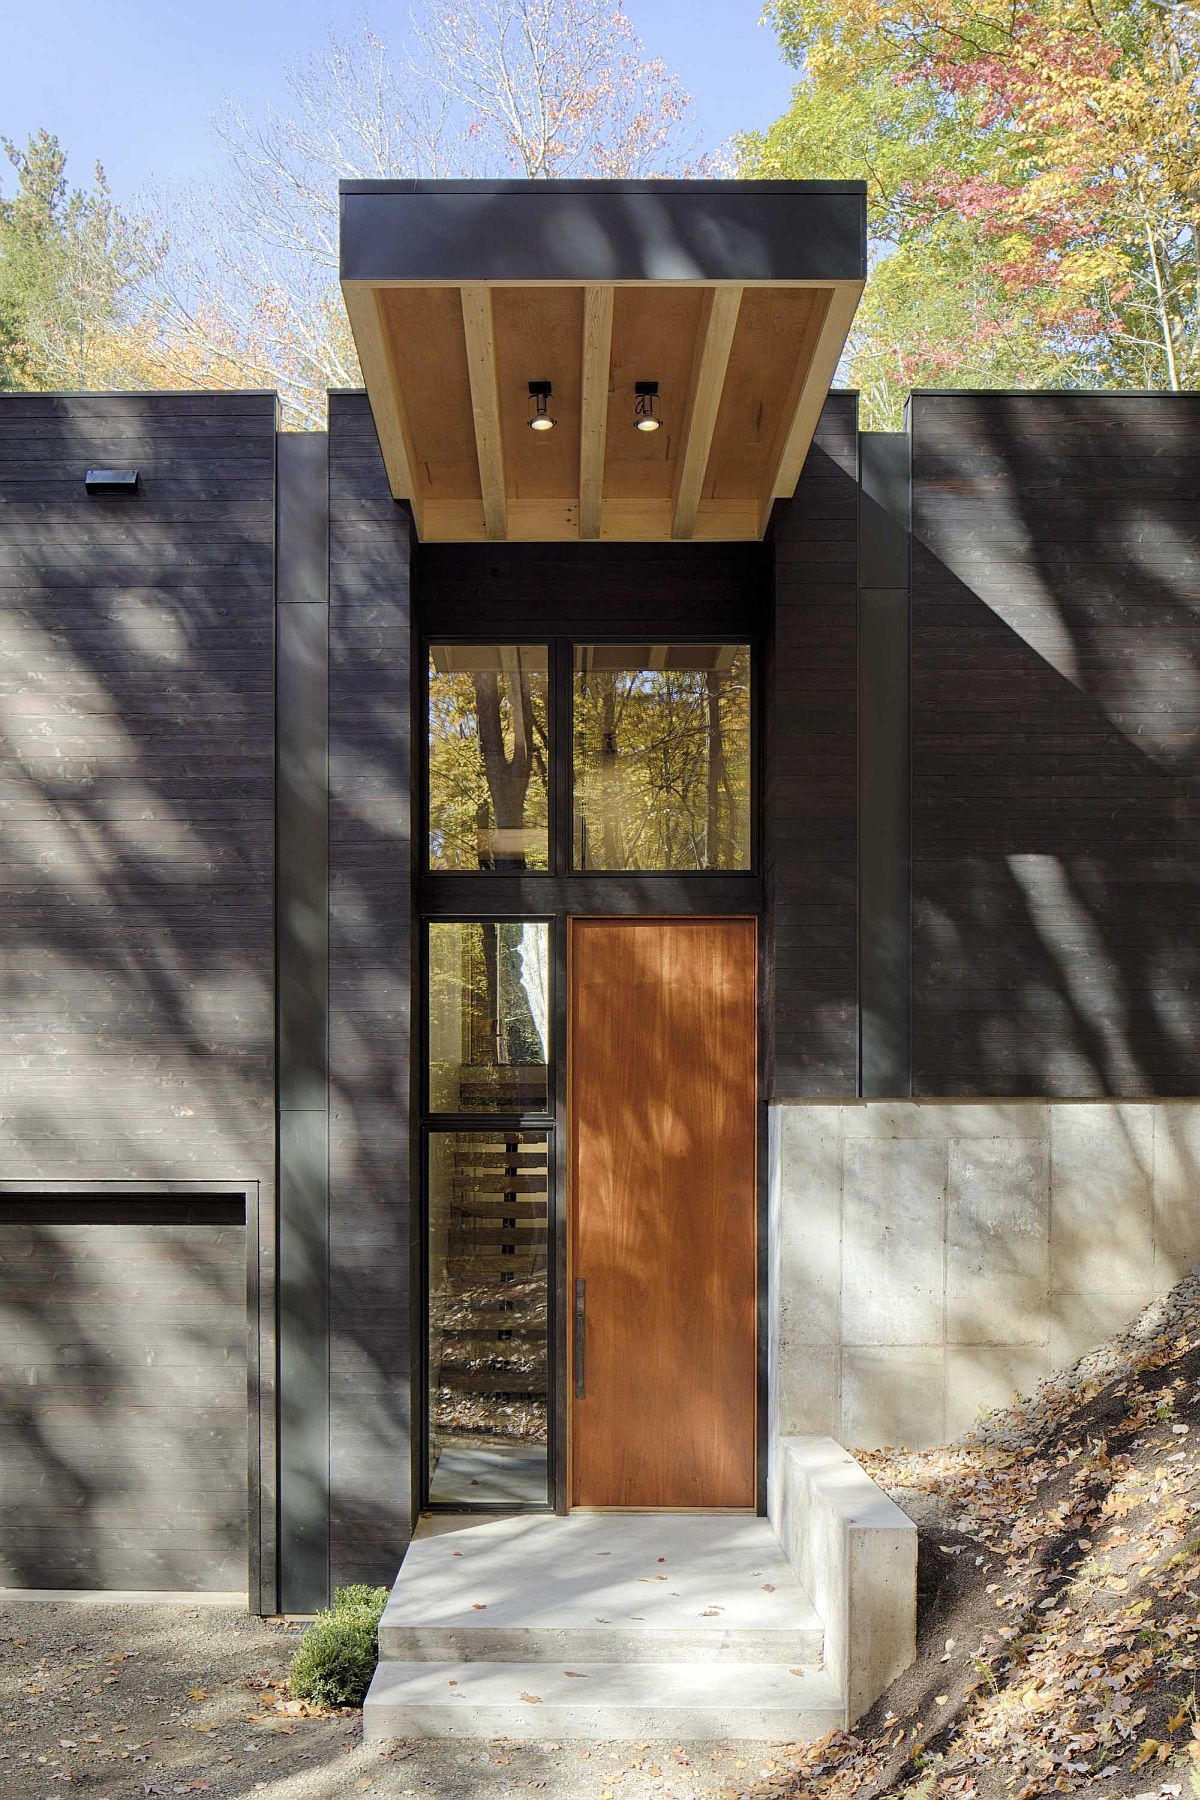 Cantilevered-portion-of-the-house-offers-natural-shade-to-the-entry